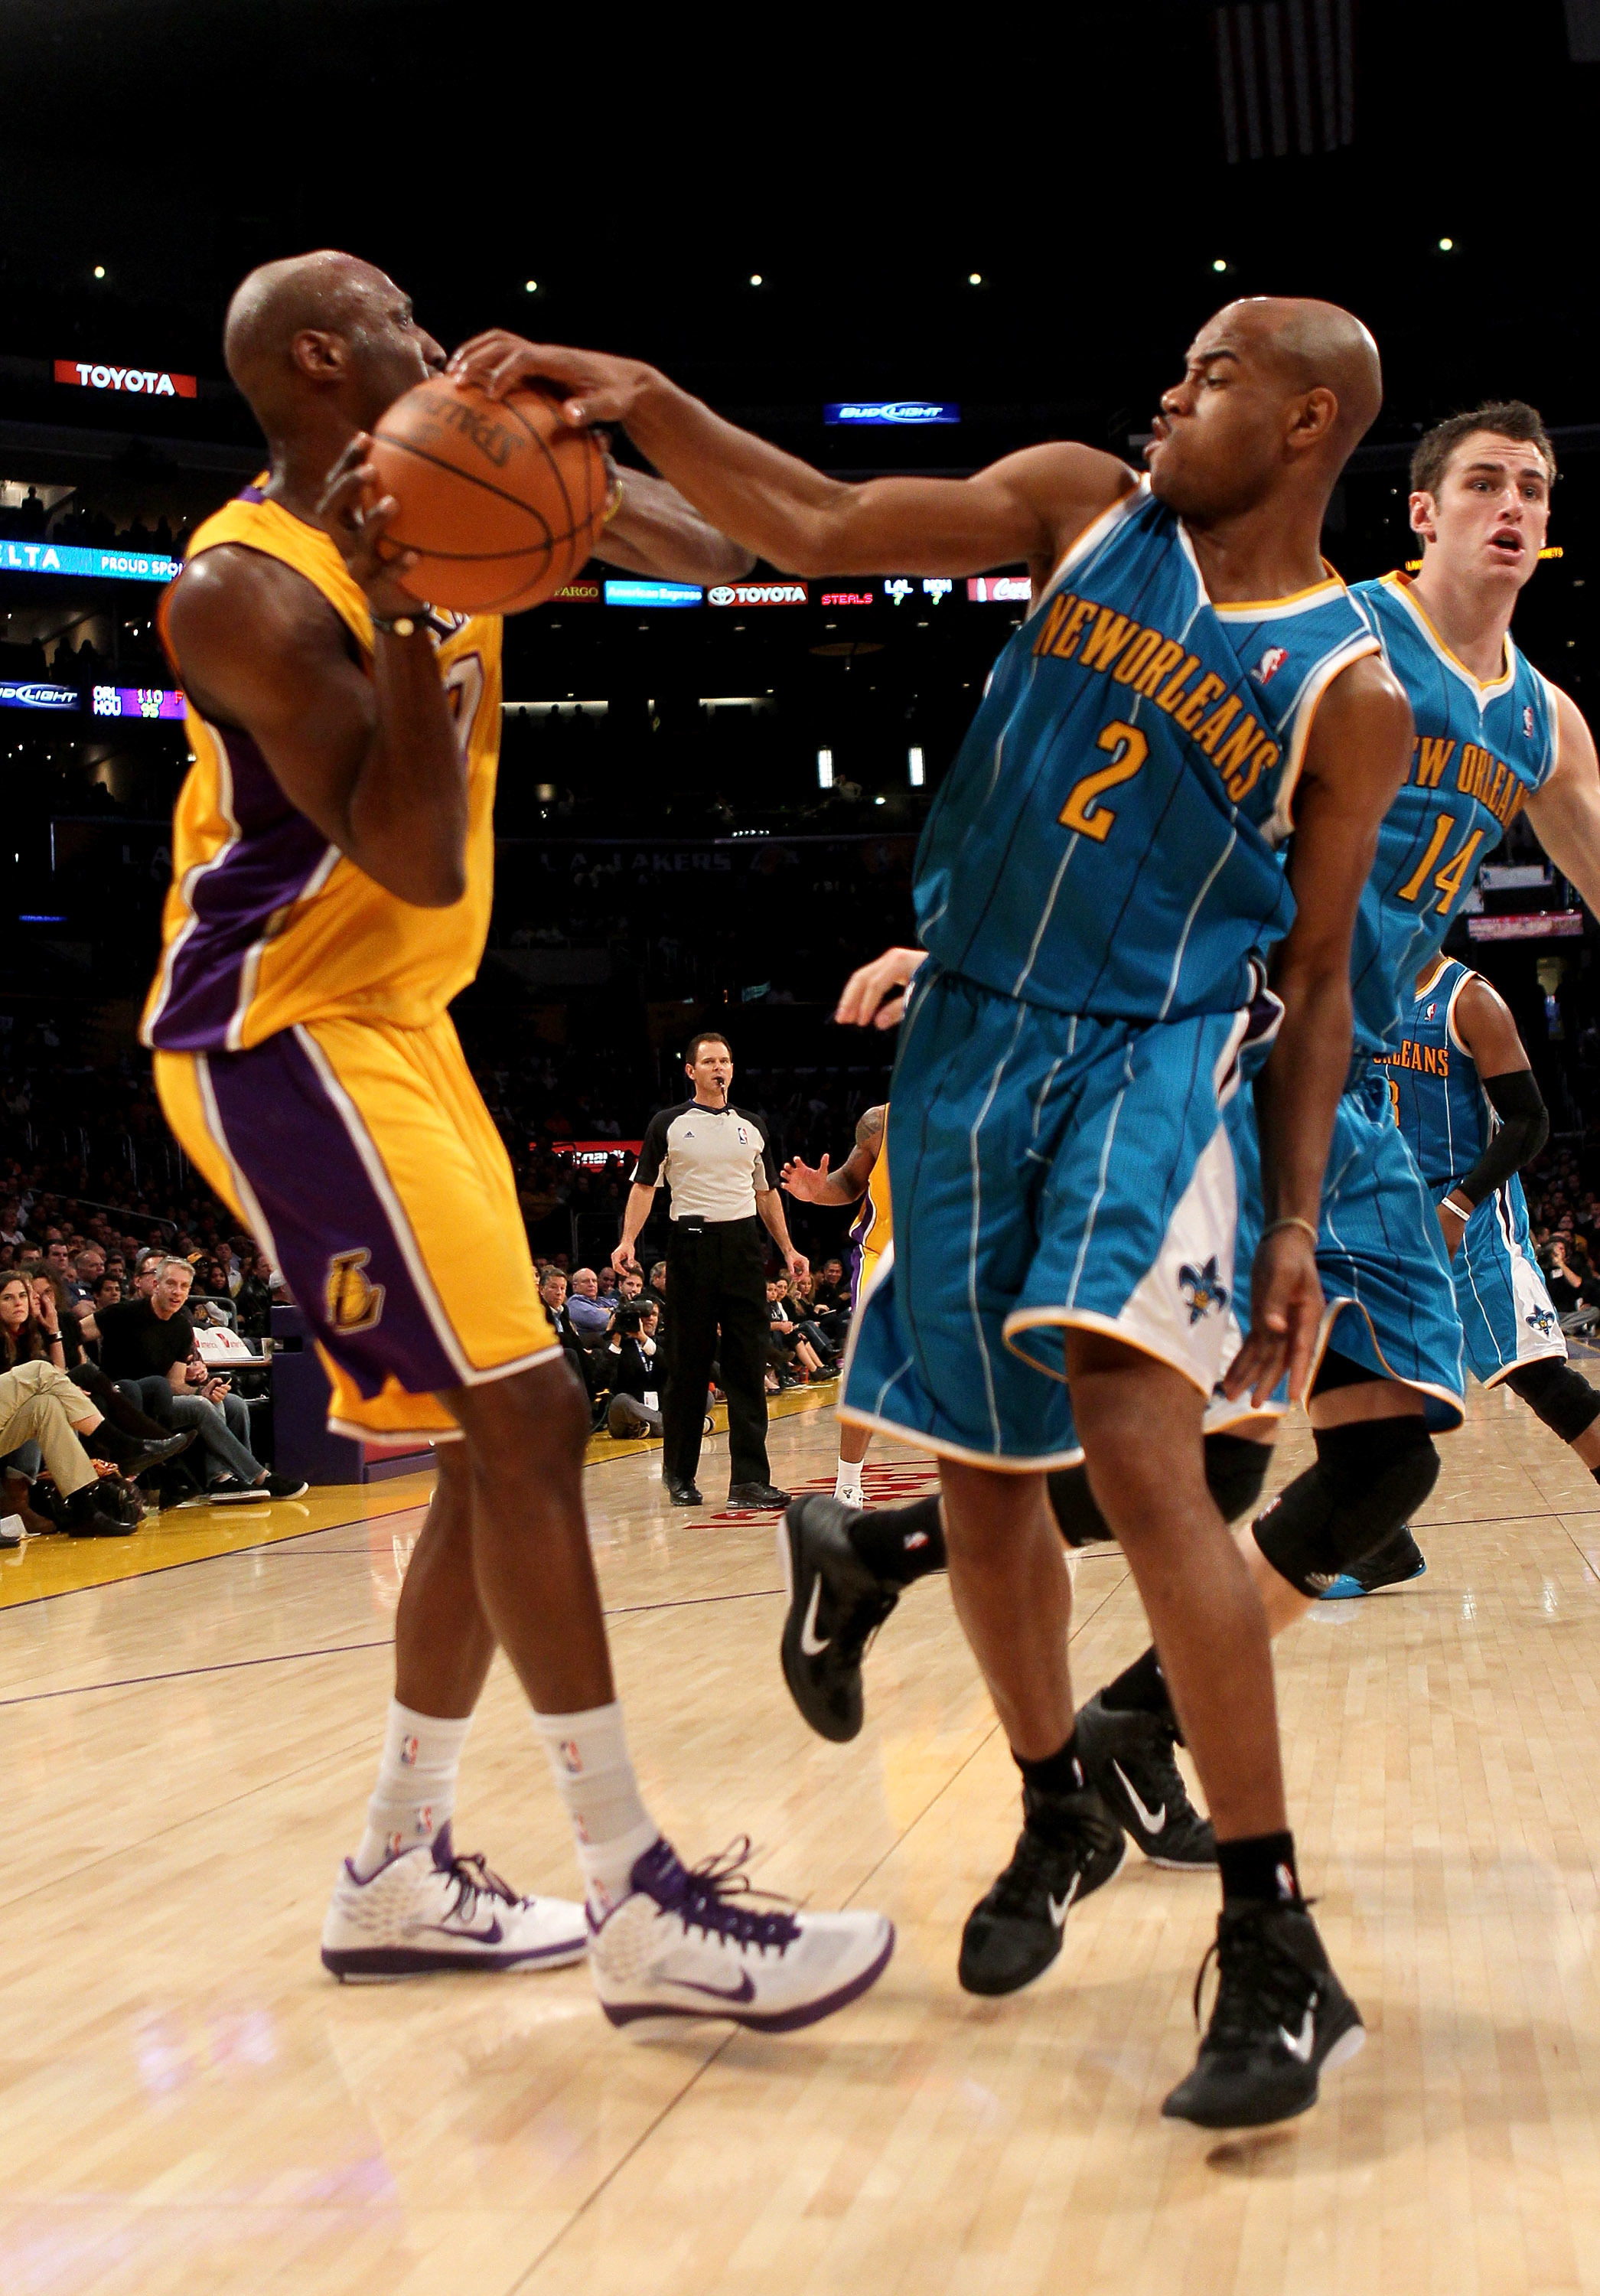 LOS ANGELES, CA - JANUARY 7:   Jarrett Jack #2 of the New Orleans Hornets gets a hand on the ball as he defends against Lamar Odom #7 of the Los Angeles Lakers at Staples Center on January 7, 2011 in Los Angeles, California.  The Lakers won 101-97.  NOTE